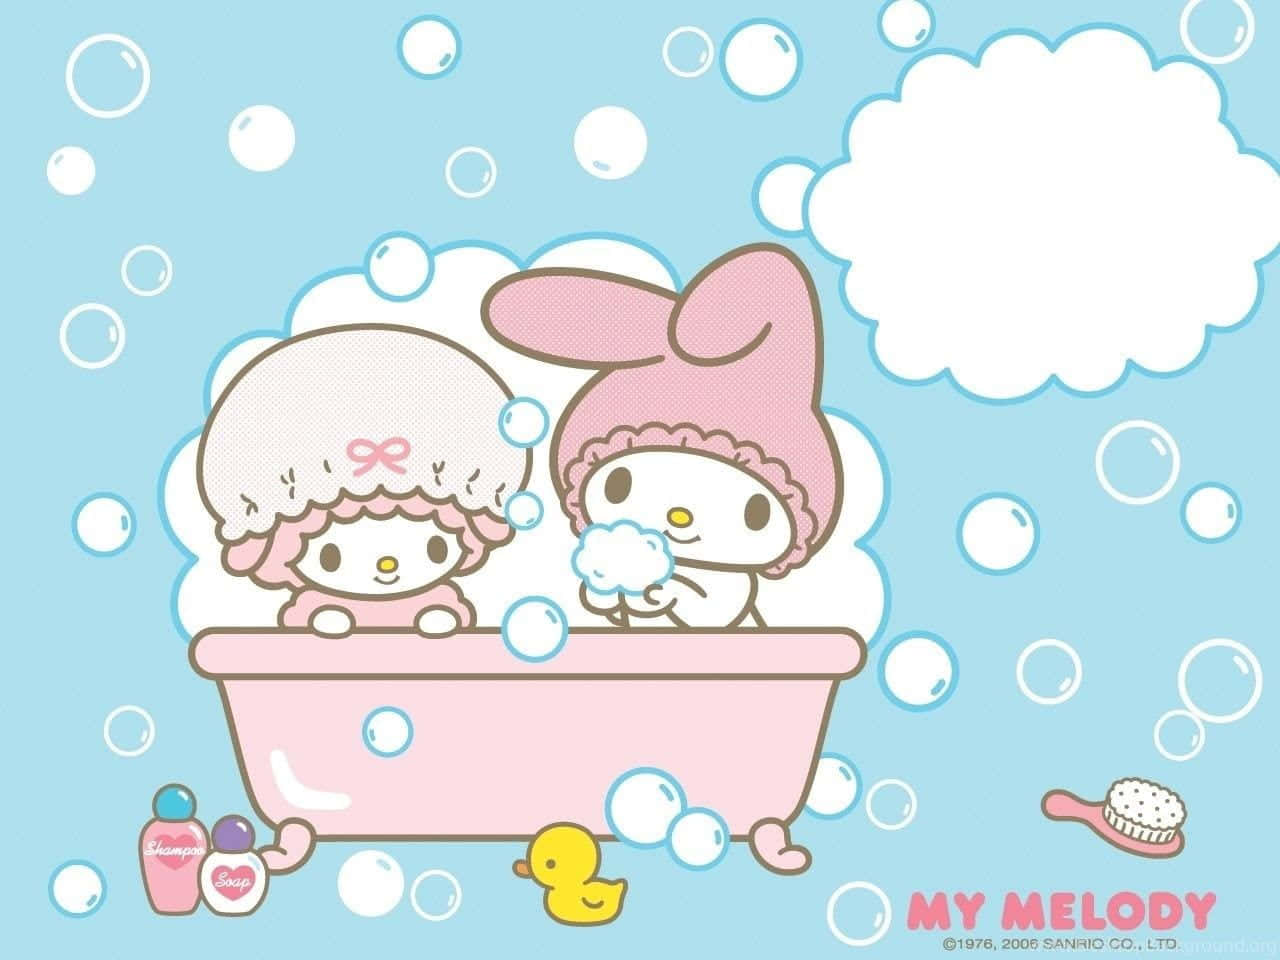 Enjoy the sweetest desktop ever with My Melody Wallpaper